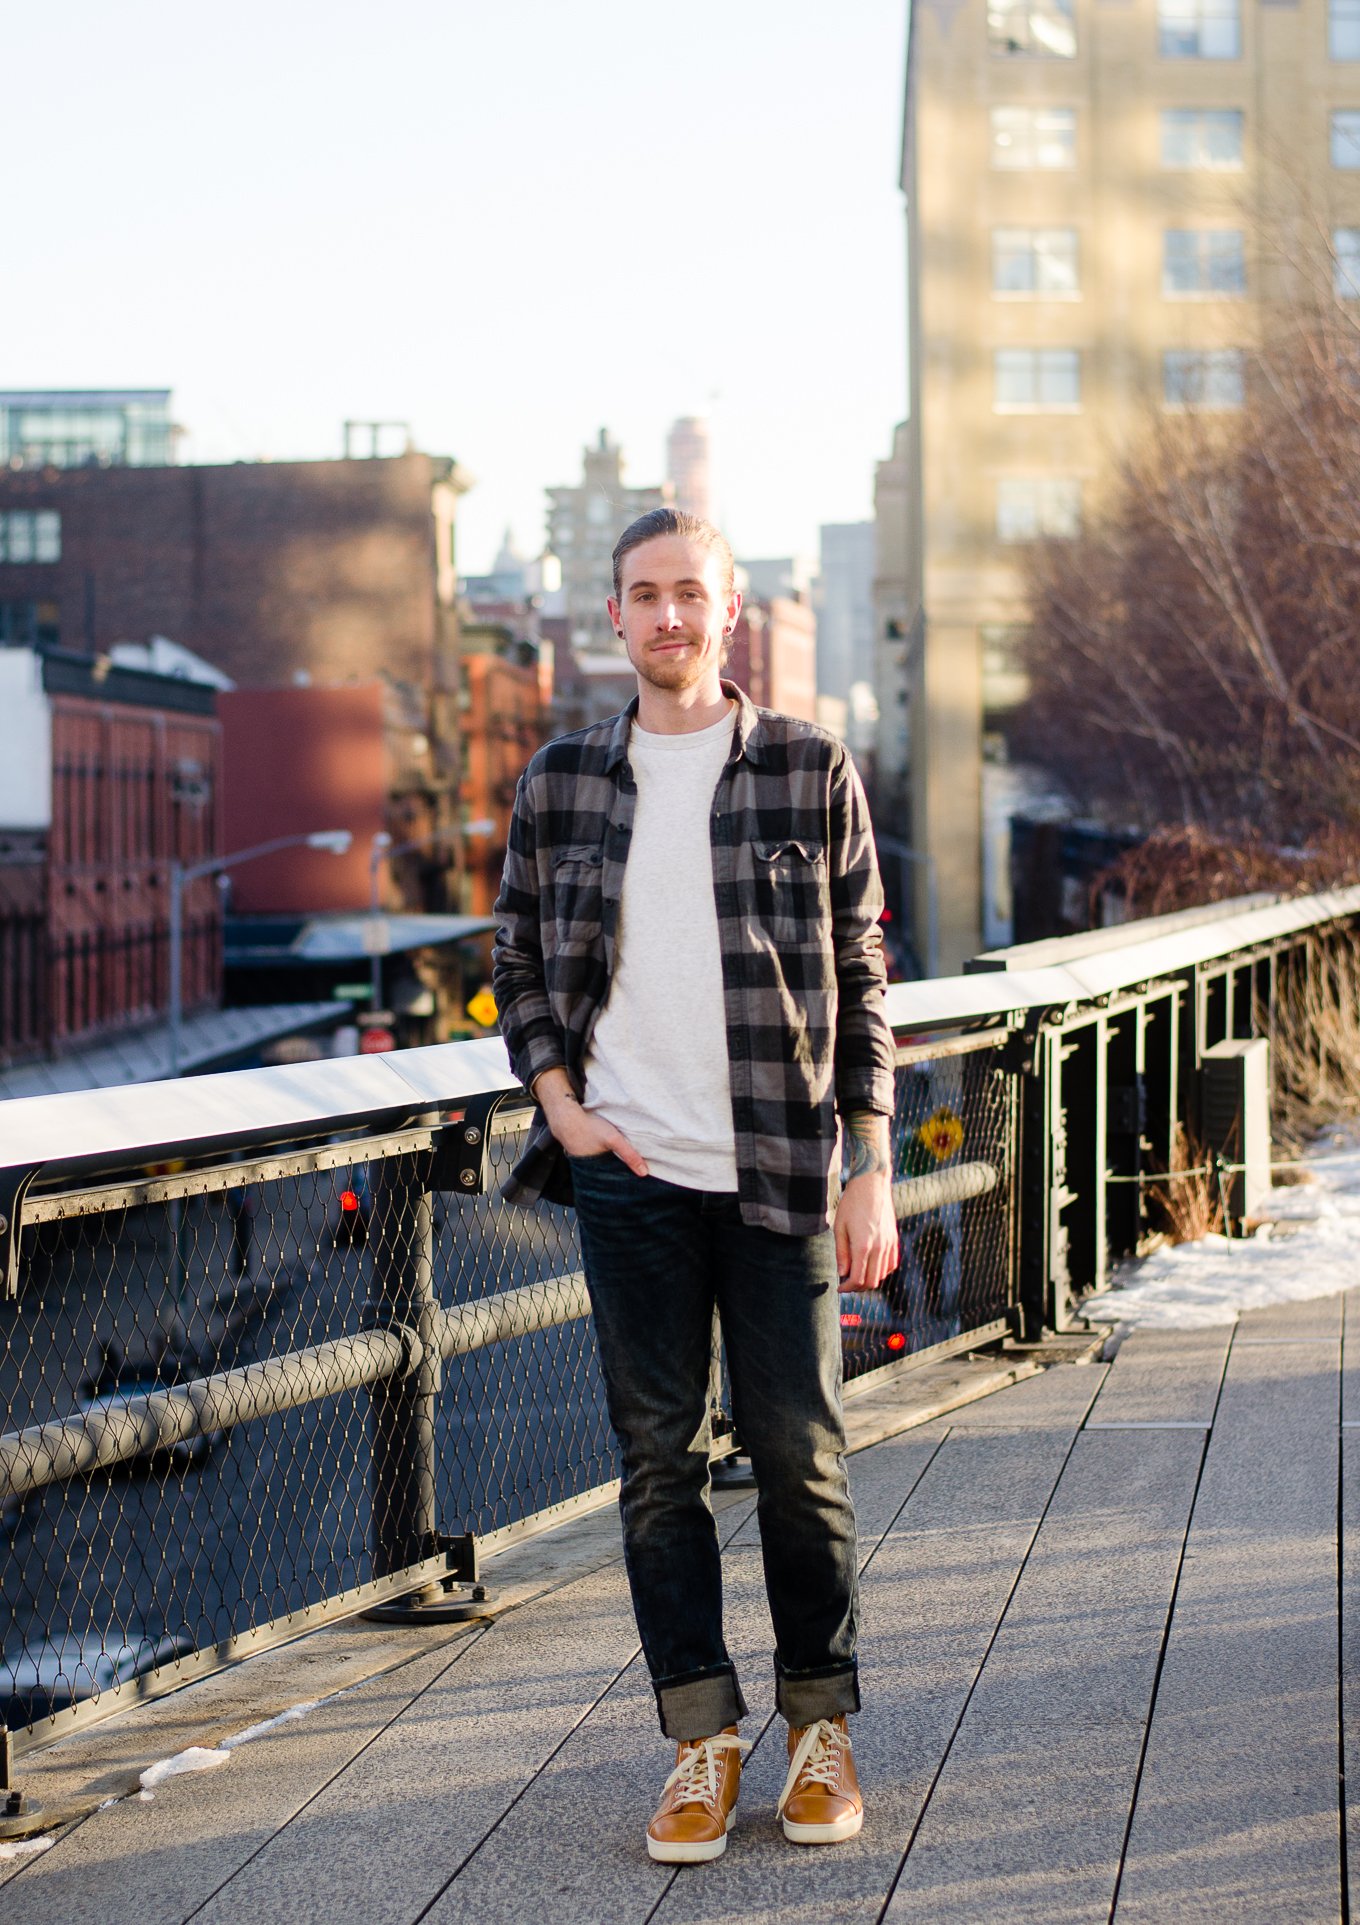 The Kentucky Gent, a men's fashion and lifestyle blogger, hangs out at the Highline during NYFW.